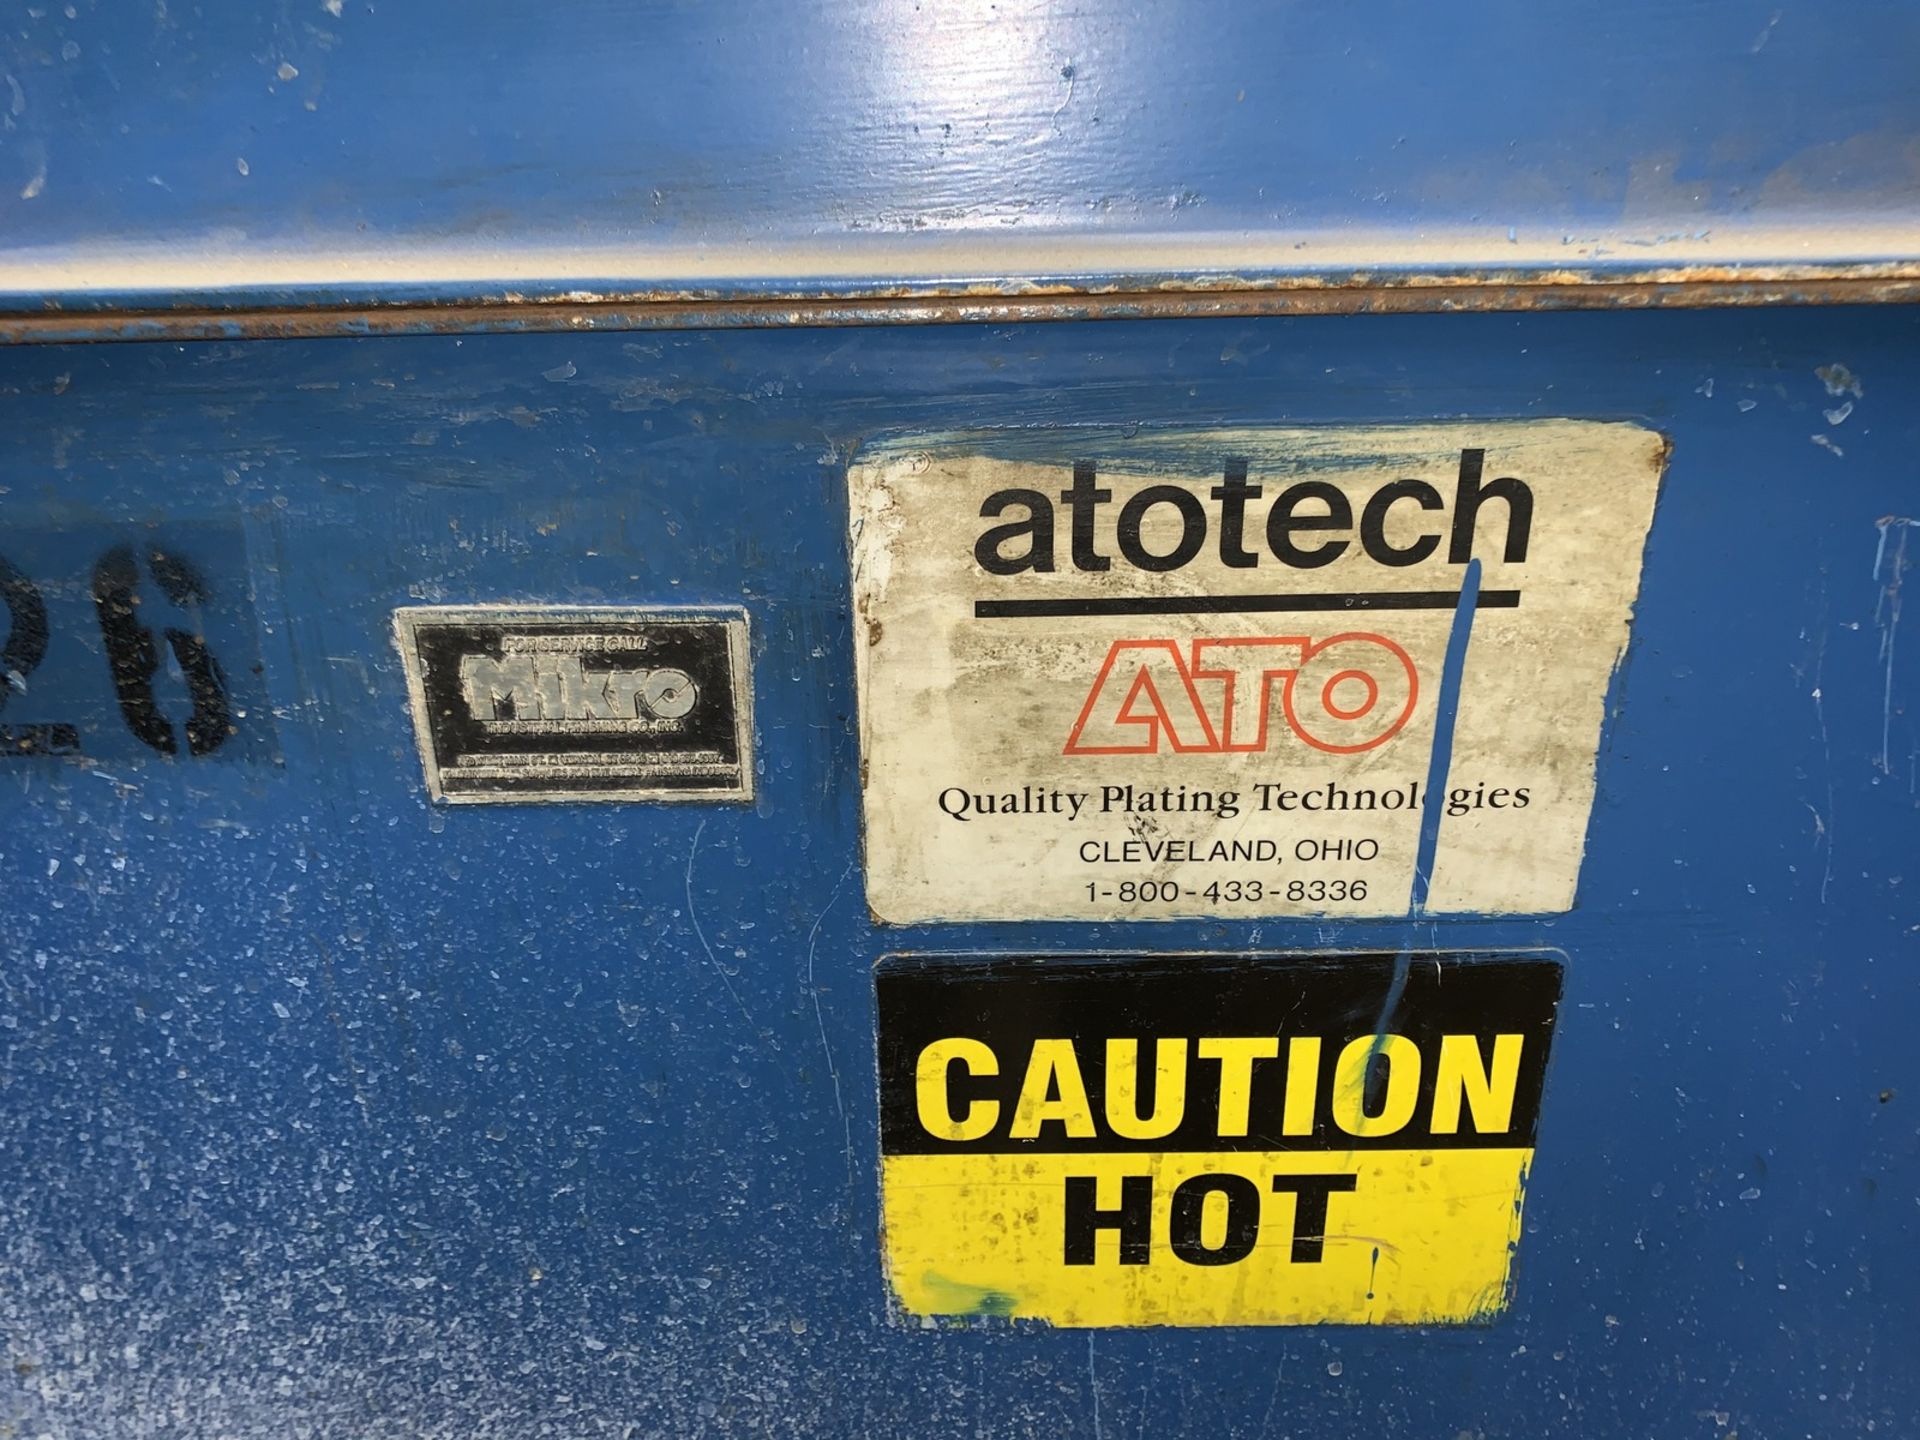 Atotech Parts Spinner / Dryer with 29" Diameter x 22-1/2" Deep Basket - Image 7 of 7